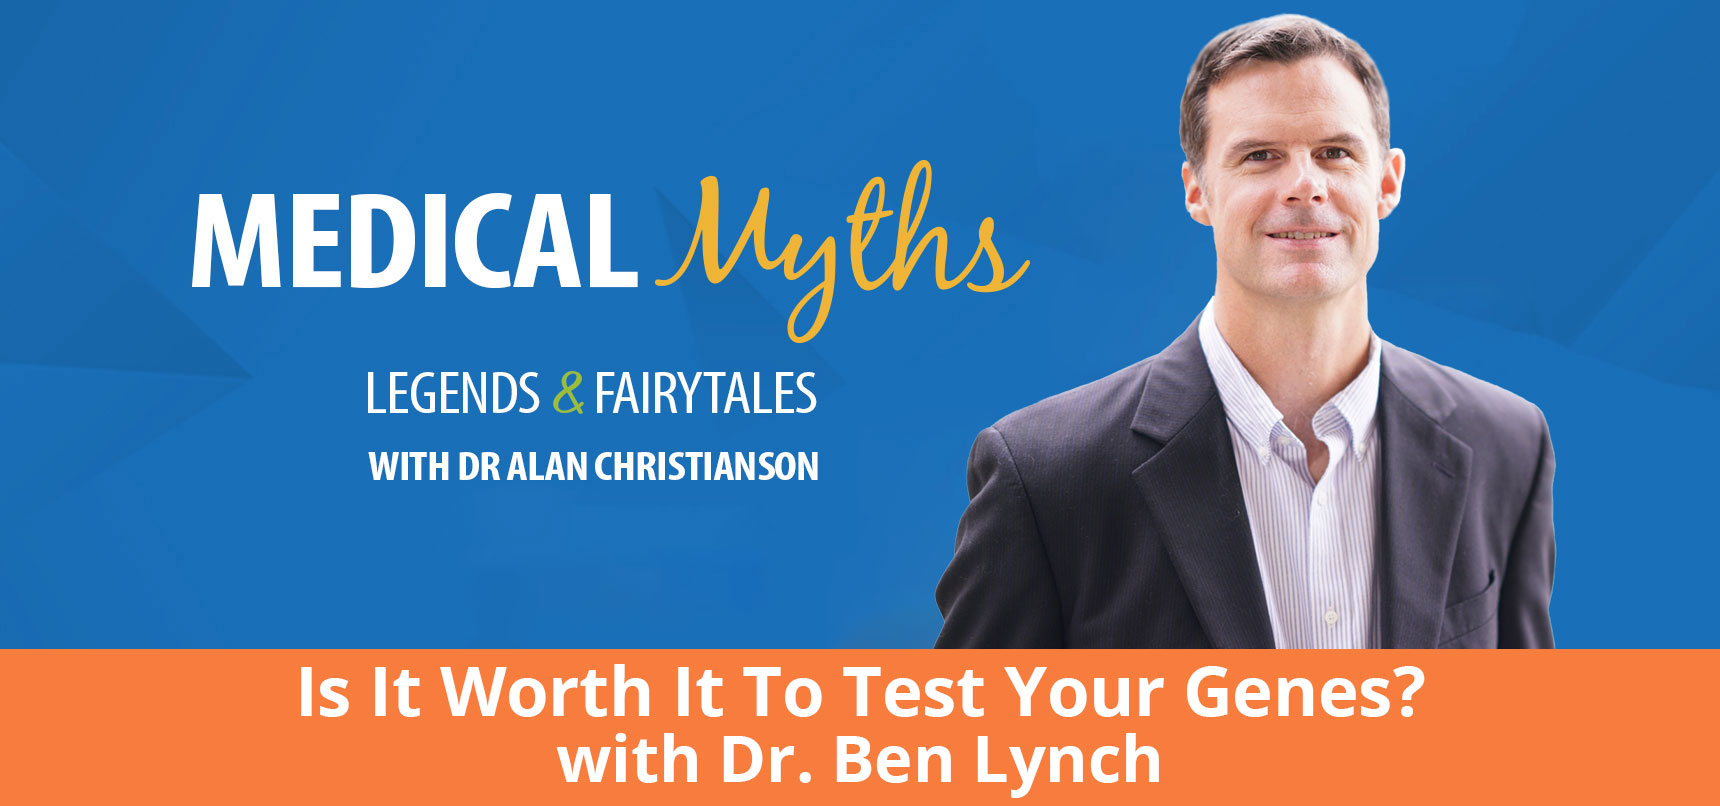 Dr Ben Lynch Is It Worth It to Test Your Genes